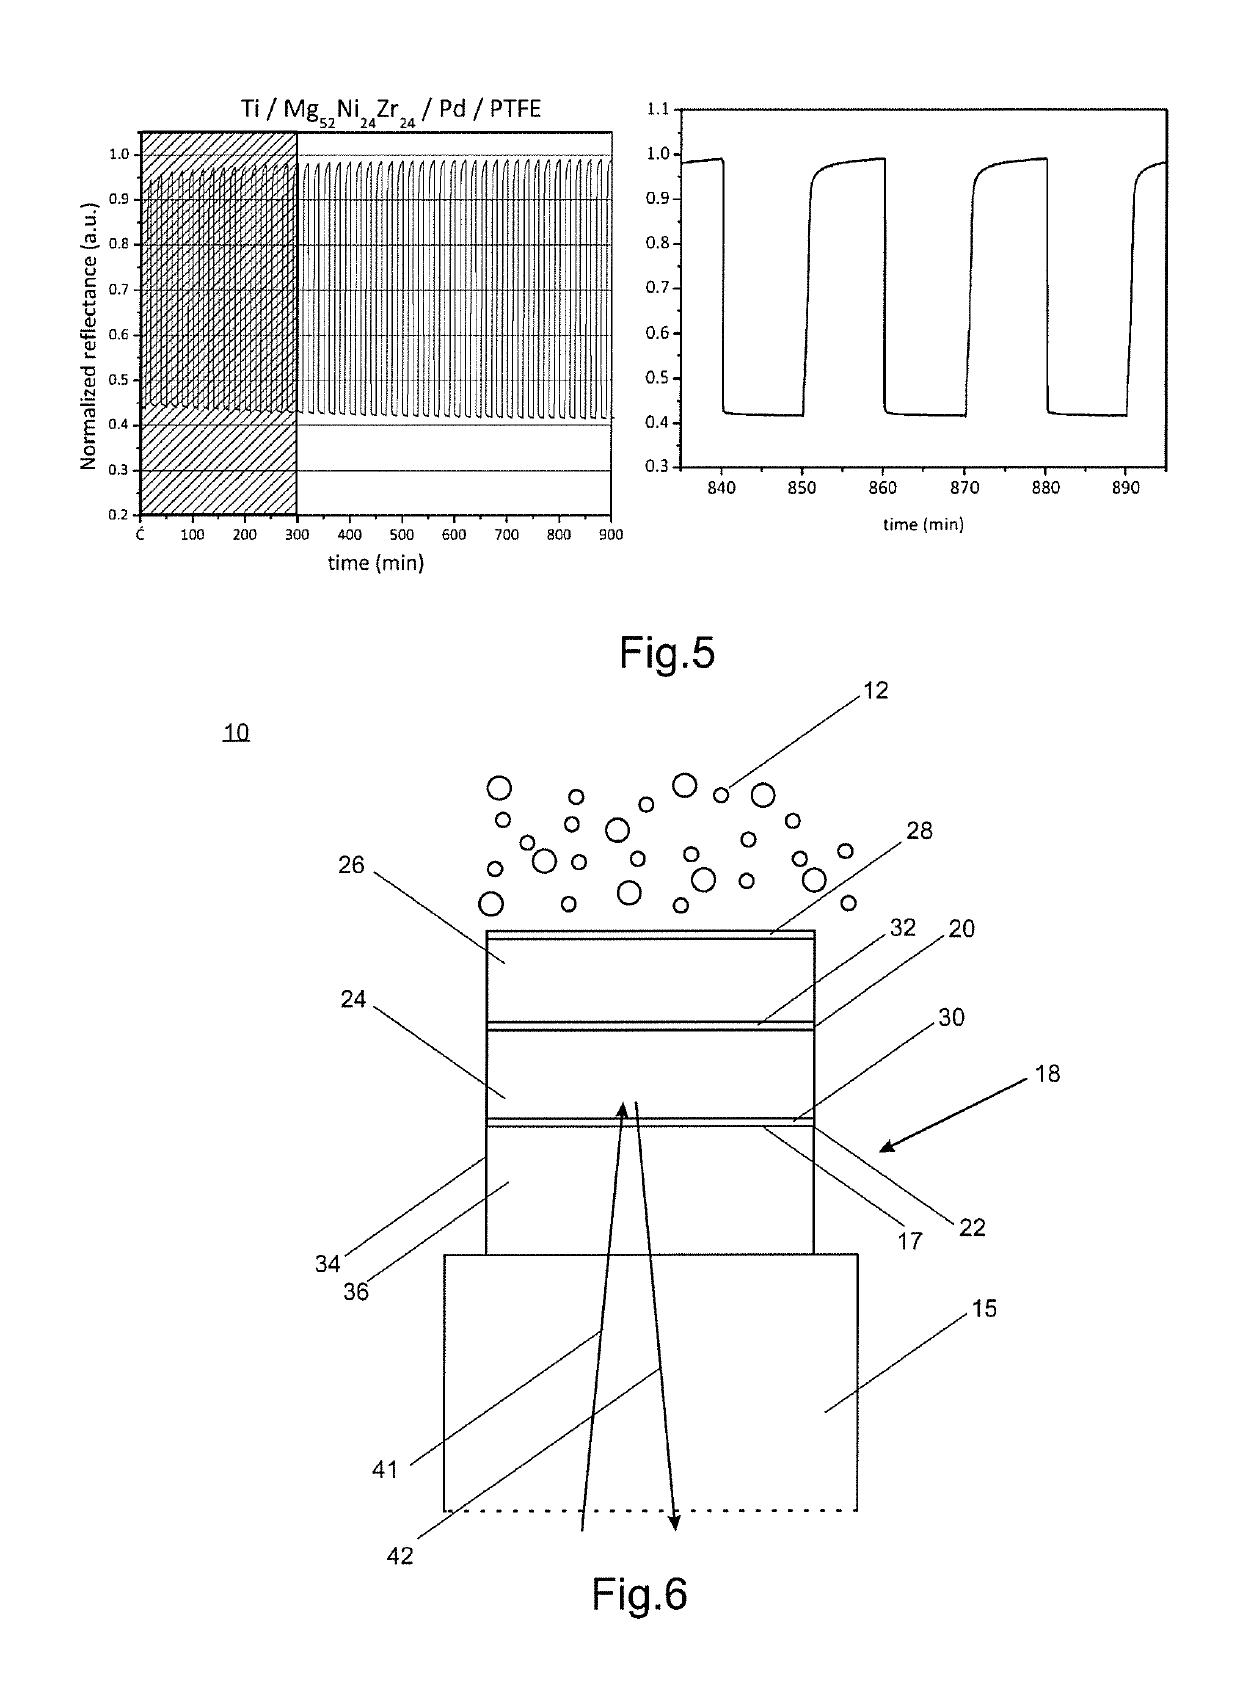 Hydrogen sensor, hydrogen detection system employing the same, and electrical device with a hydrogen detection system